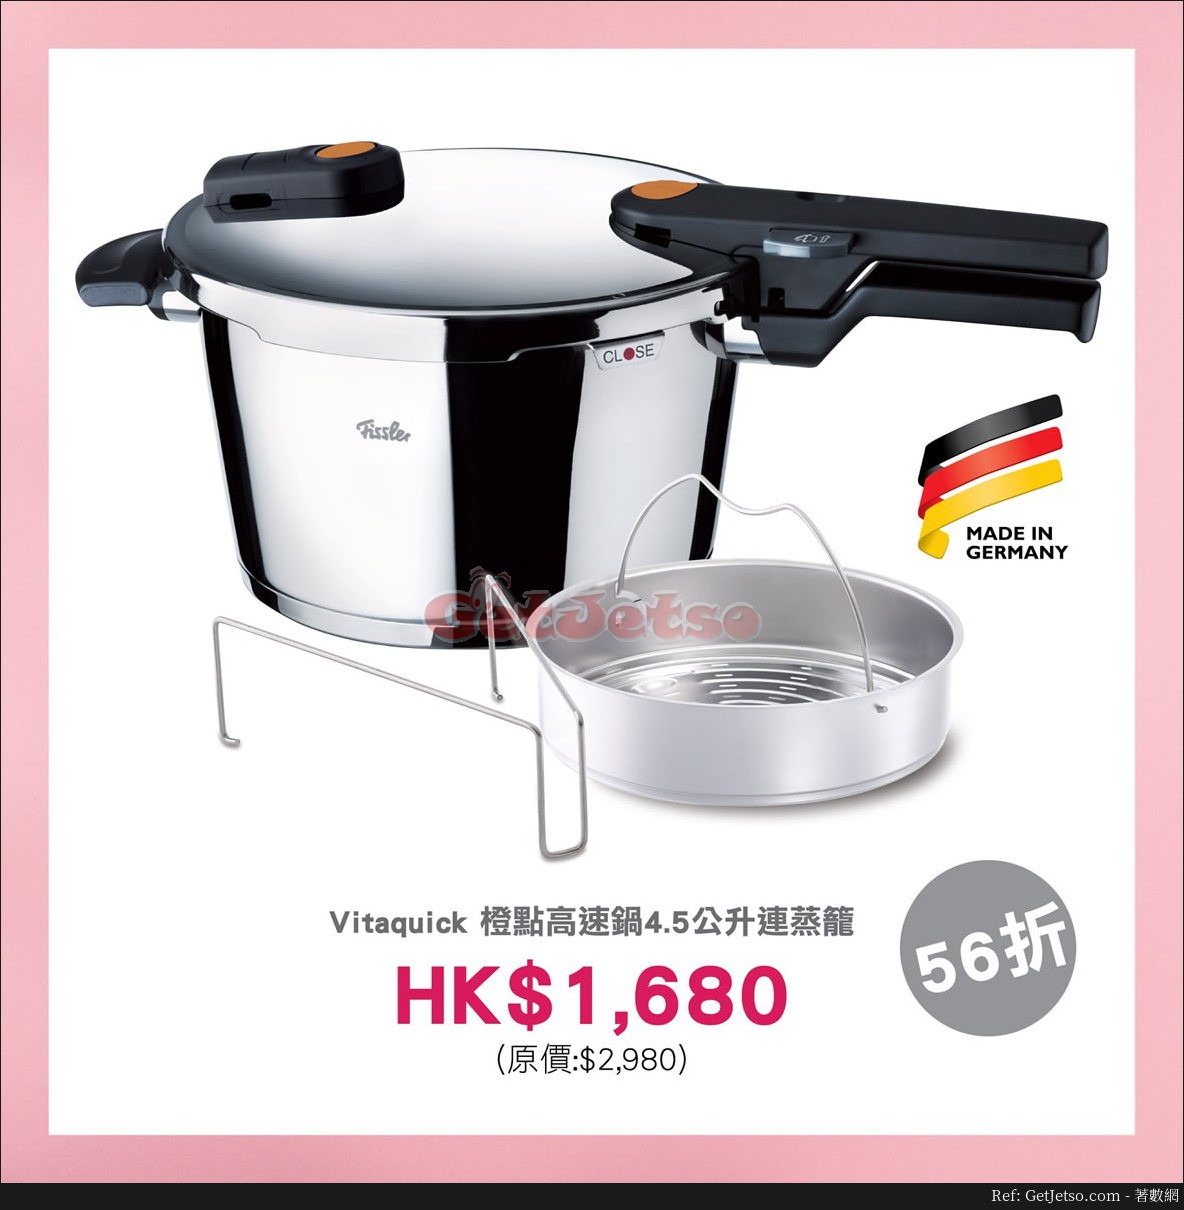 Fissler x Cook town 低至3折Private sale 優惠(18年2月1-3日)圖片4